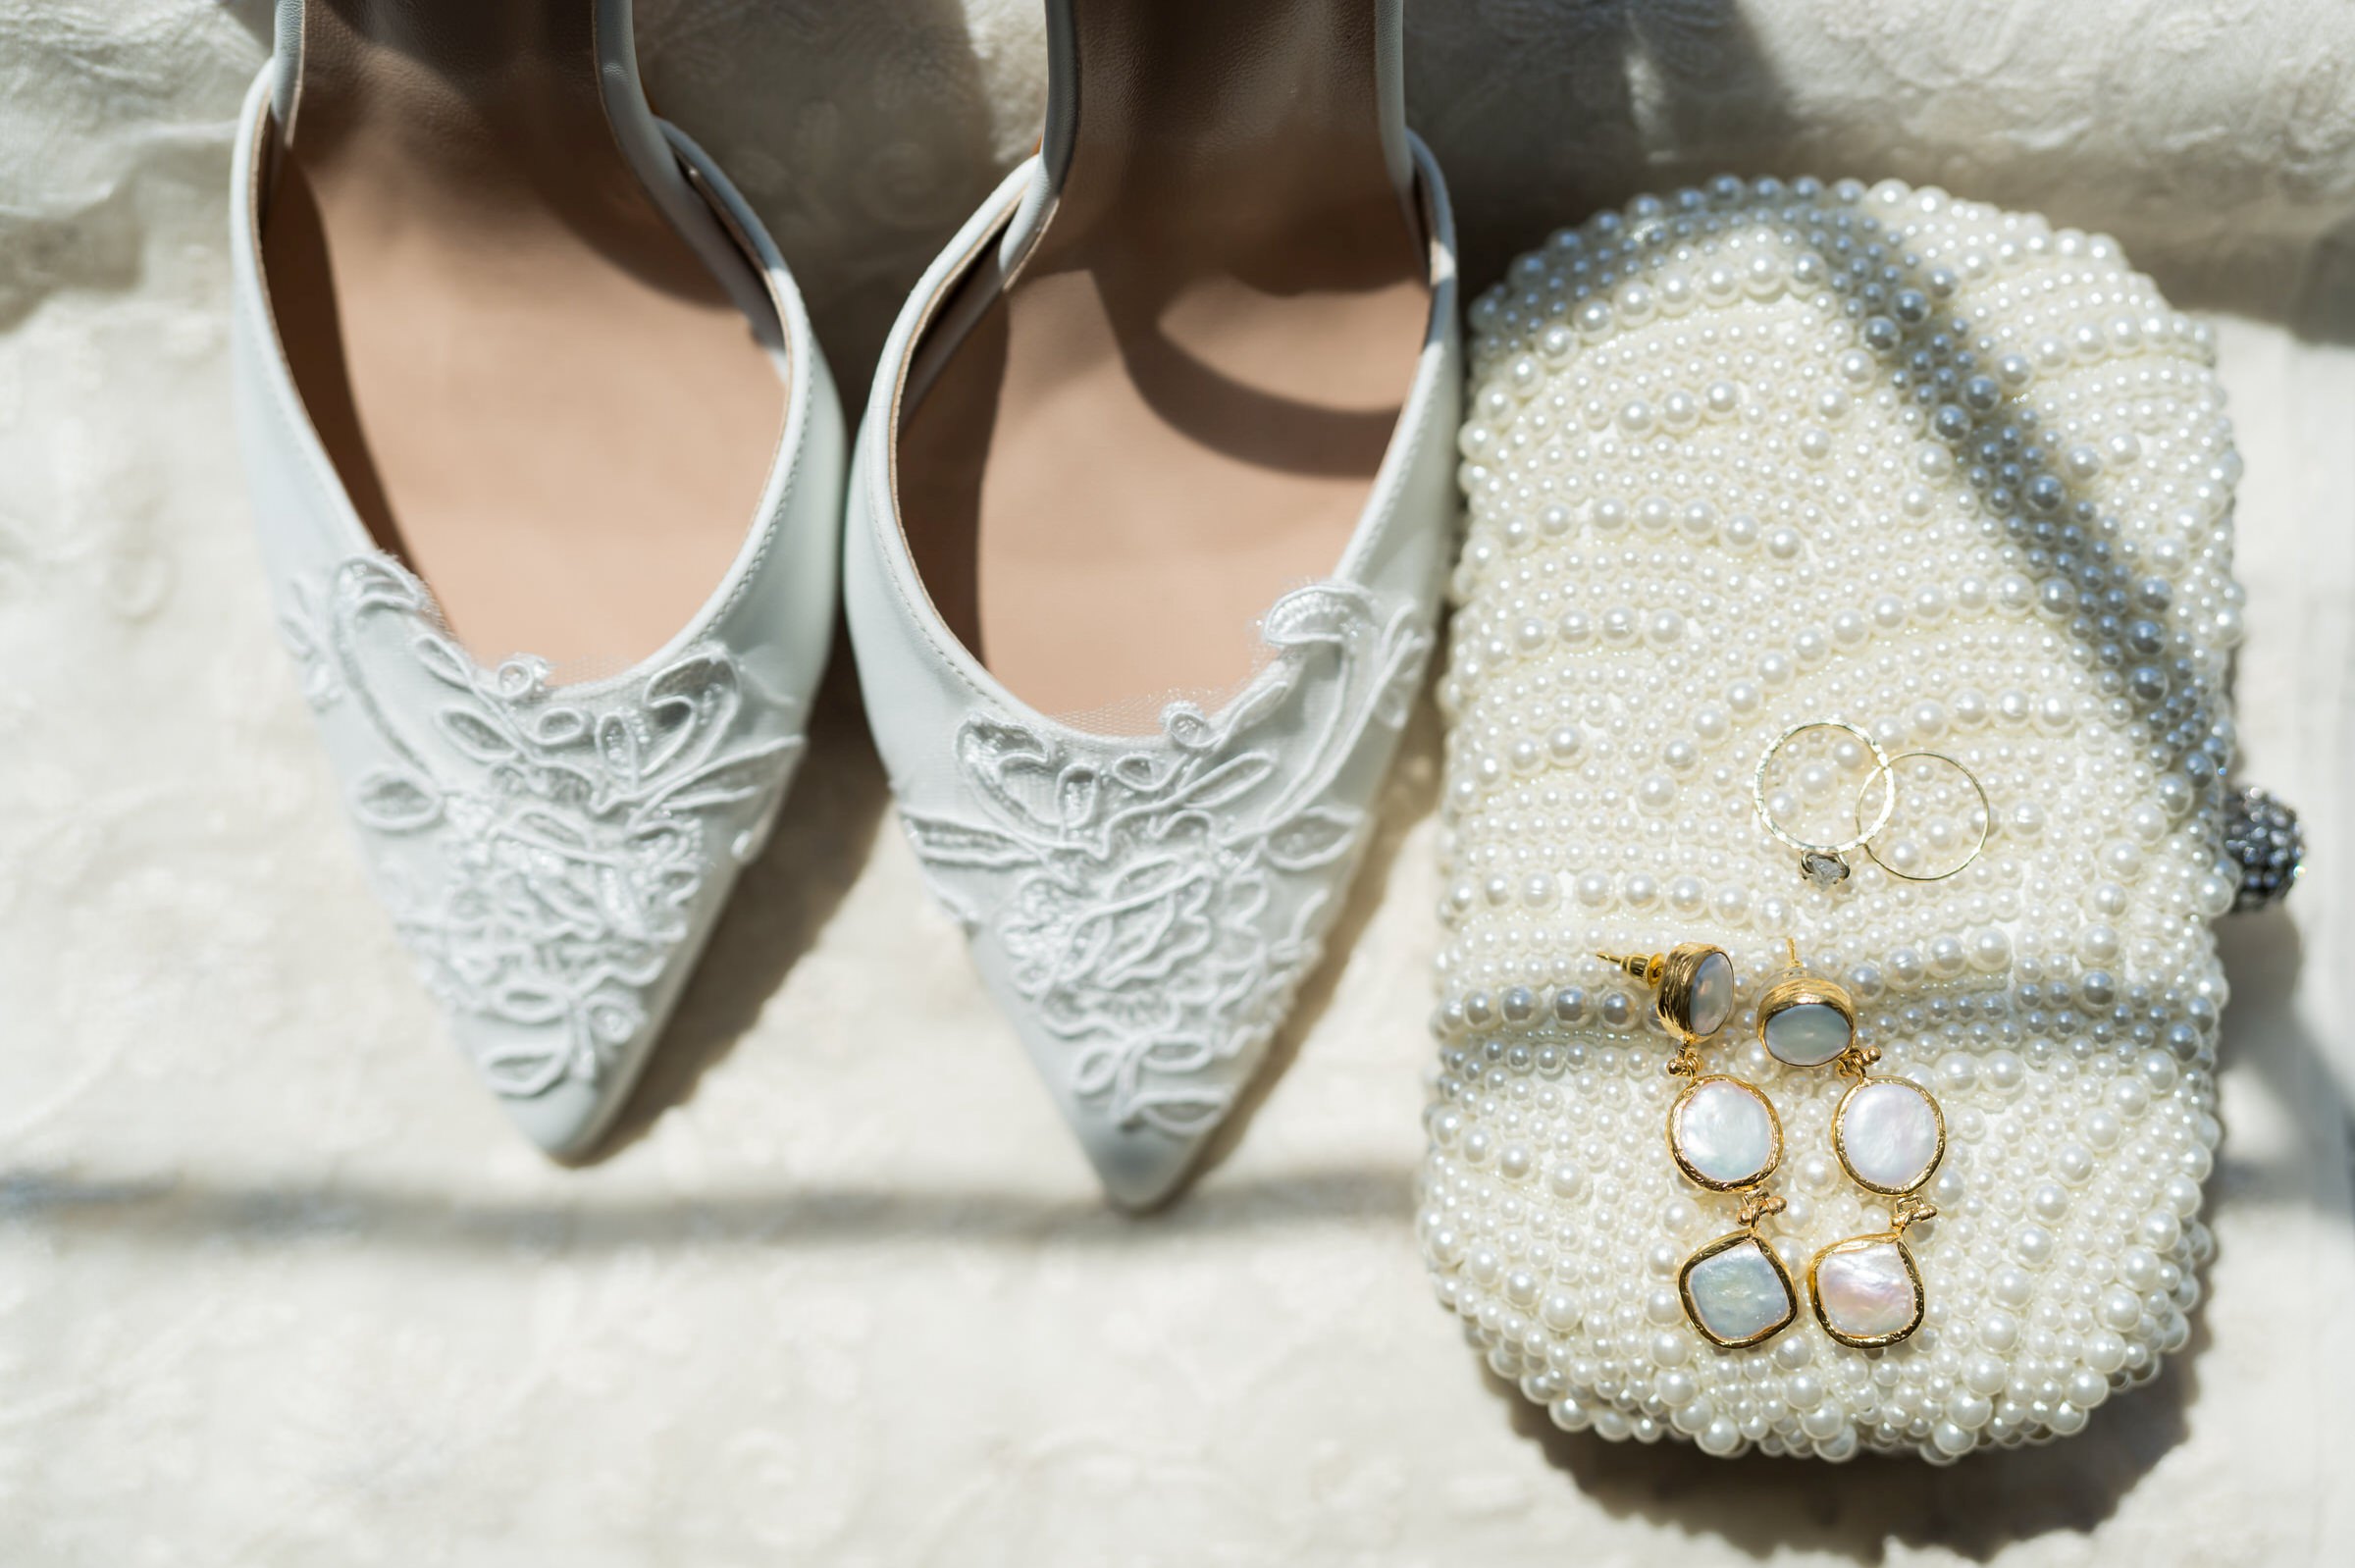 Bride's shoes, earrings and wedding ring at Traverse City wedding.  